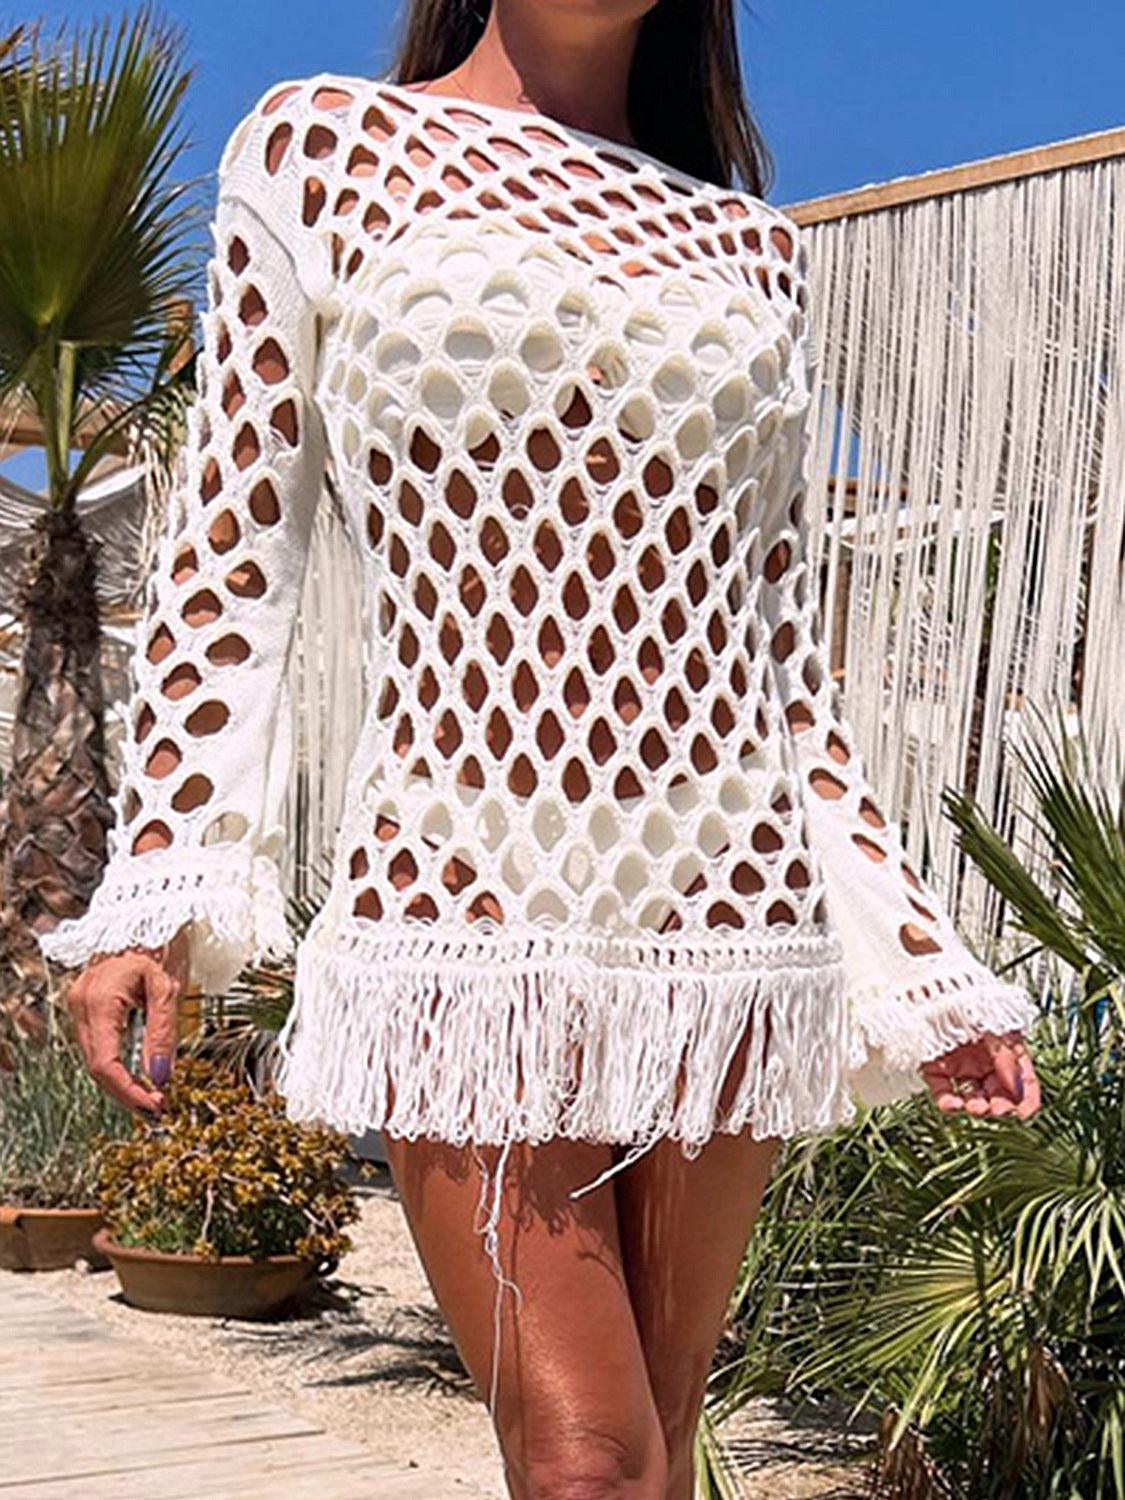 a woman wearing a white crochet sweater and shorts